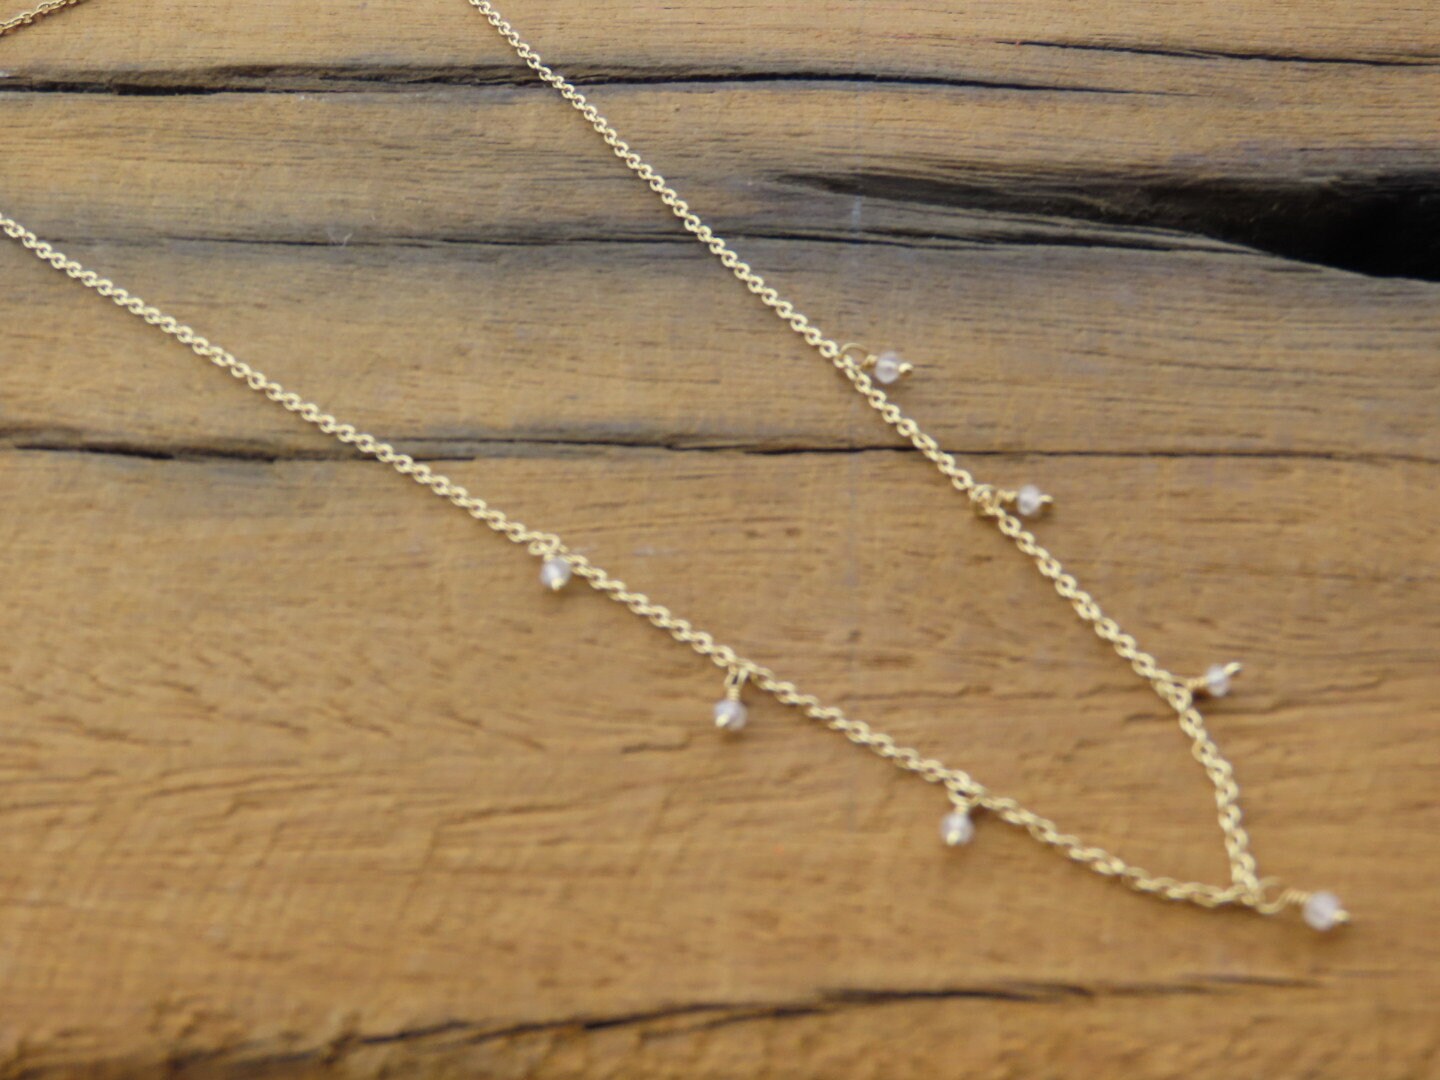 Gold Dainty Moonstone Necklace